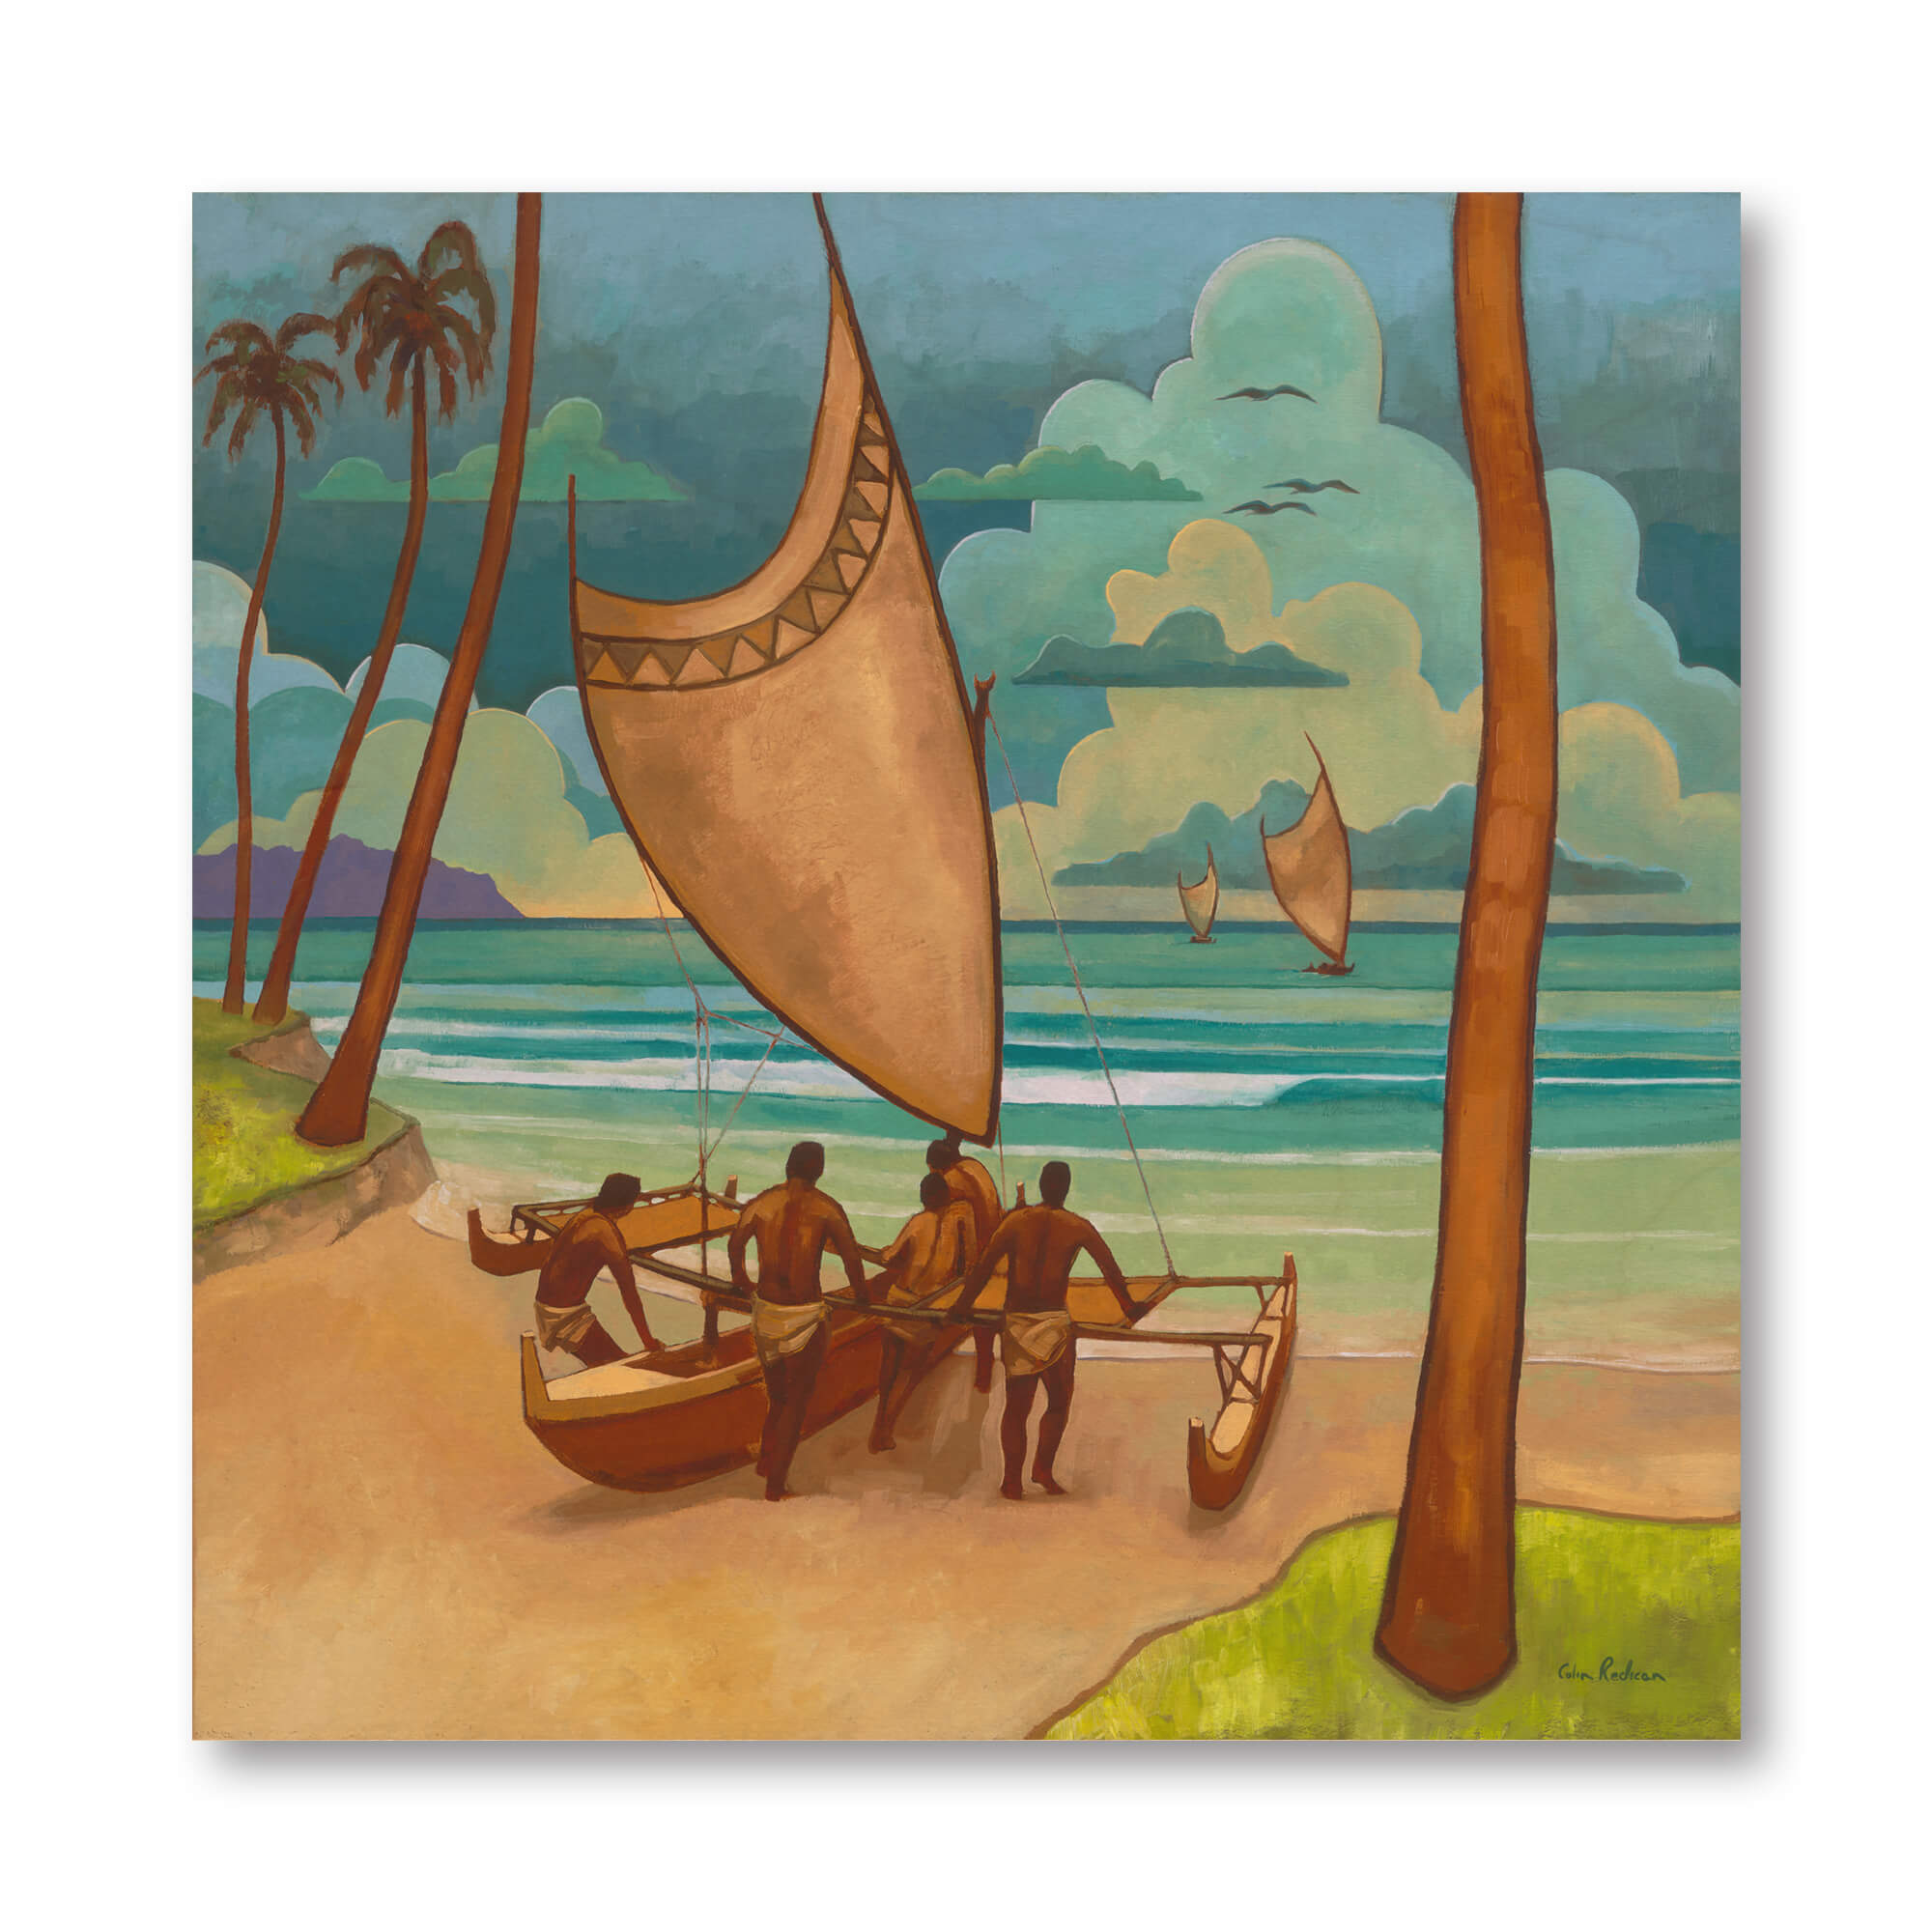 Men holding a canoe by Hawaii artist Colin Redican